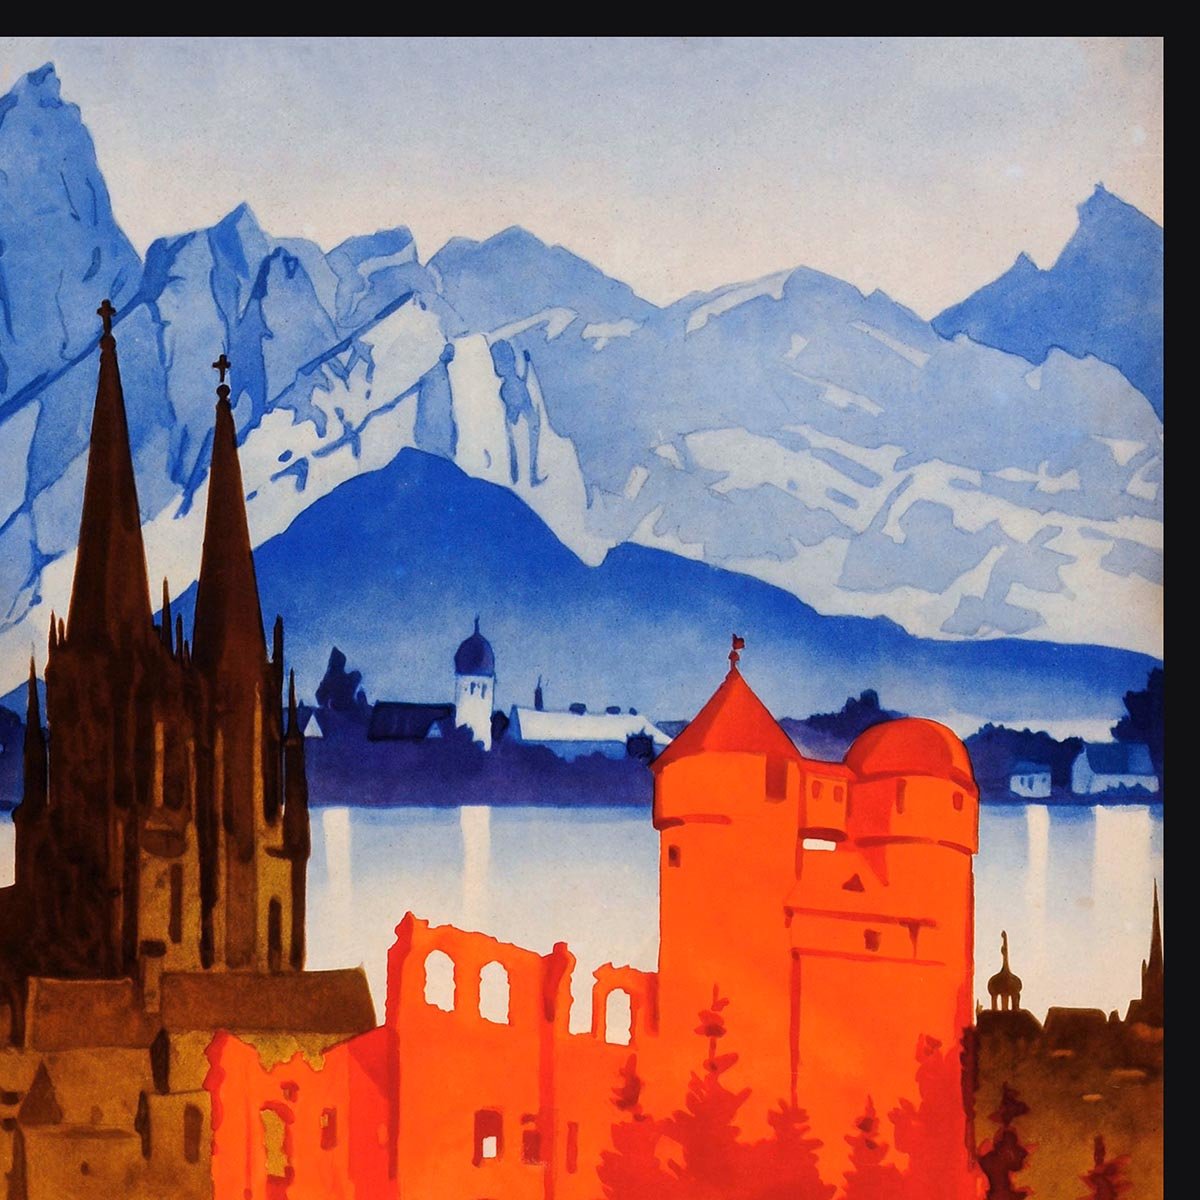 Germany Travel Poster